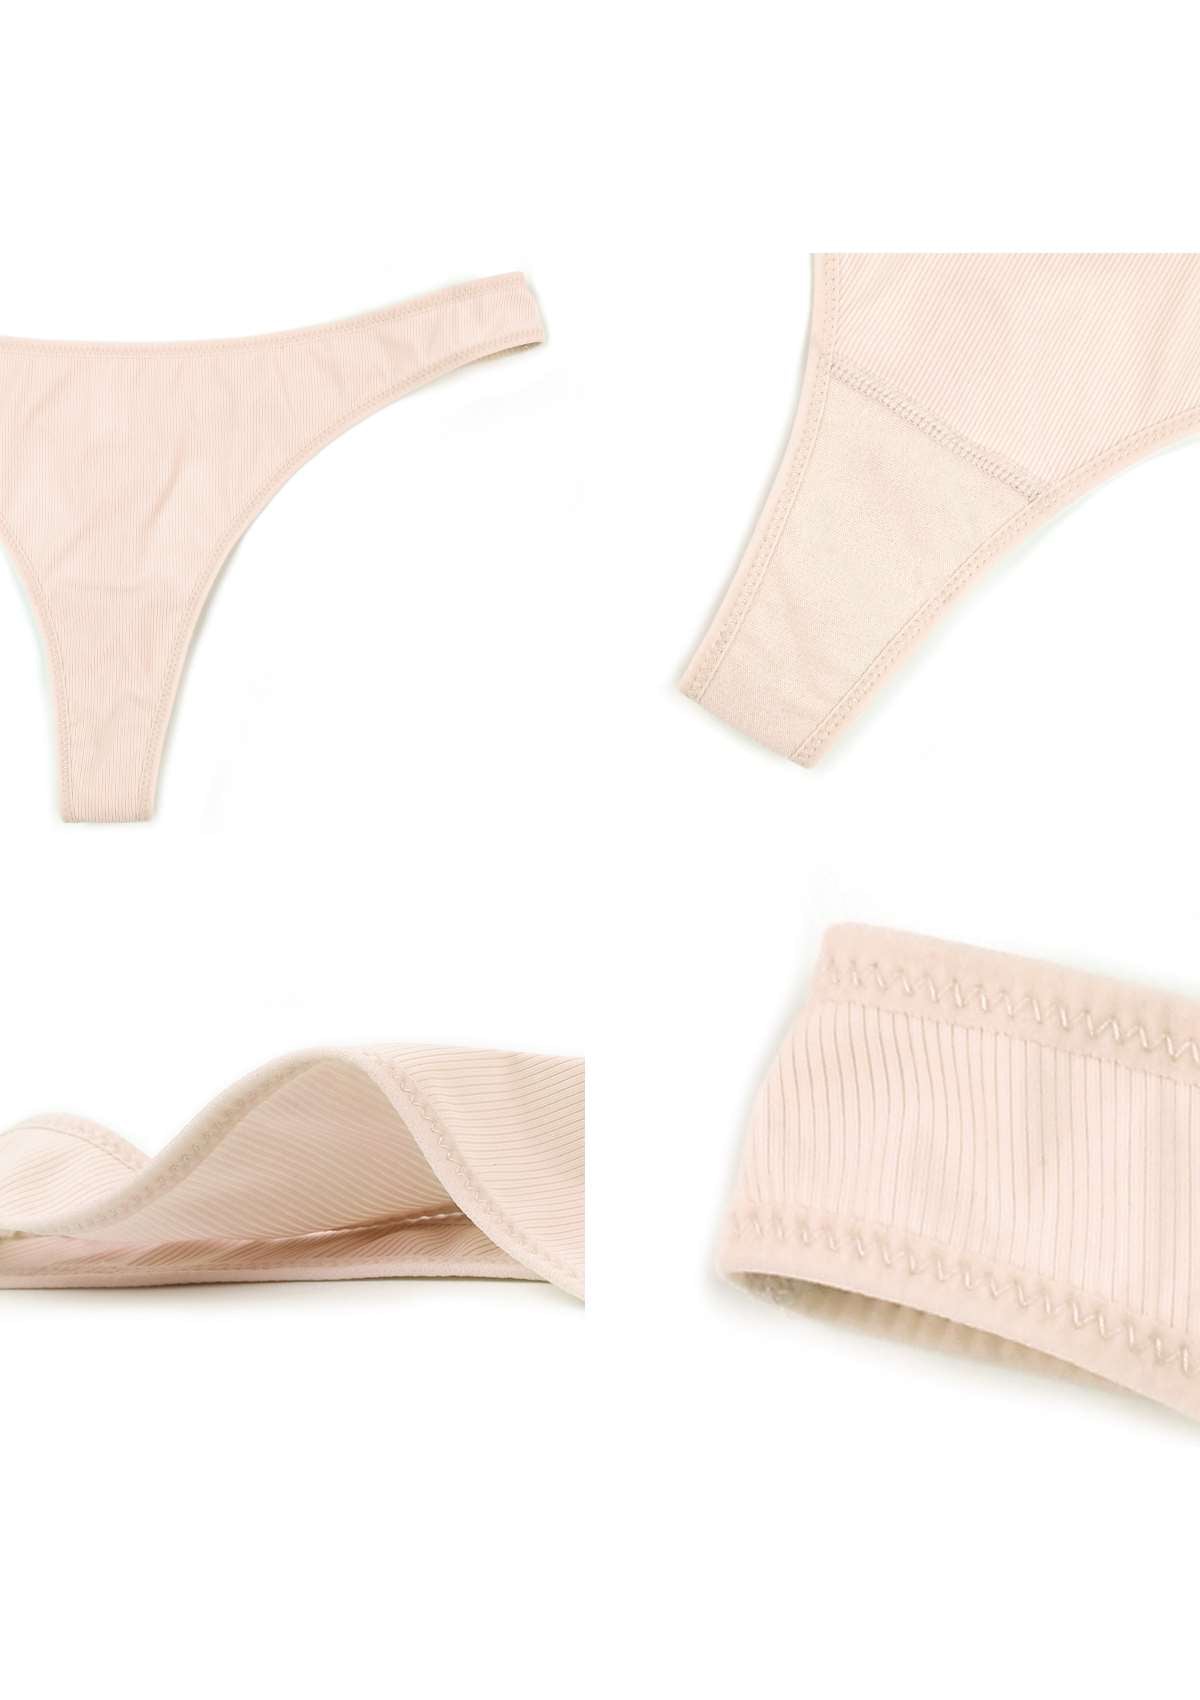 HSIA Ribbed Knit Cotton Thong Underwear 3 Pack - L / Black+White+Pink Beige